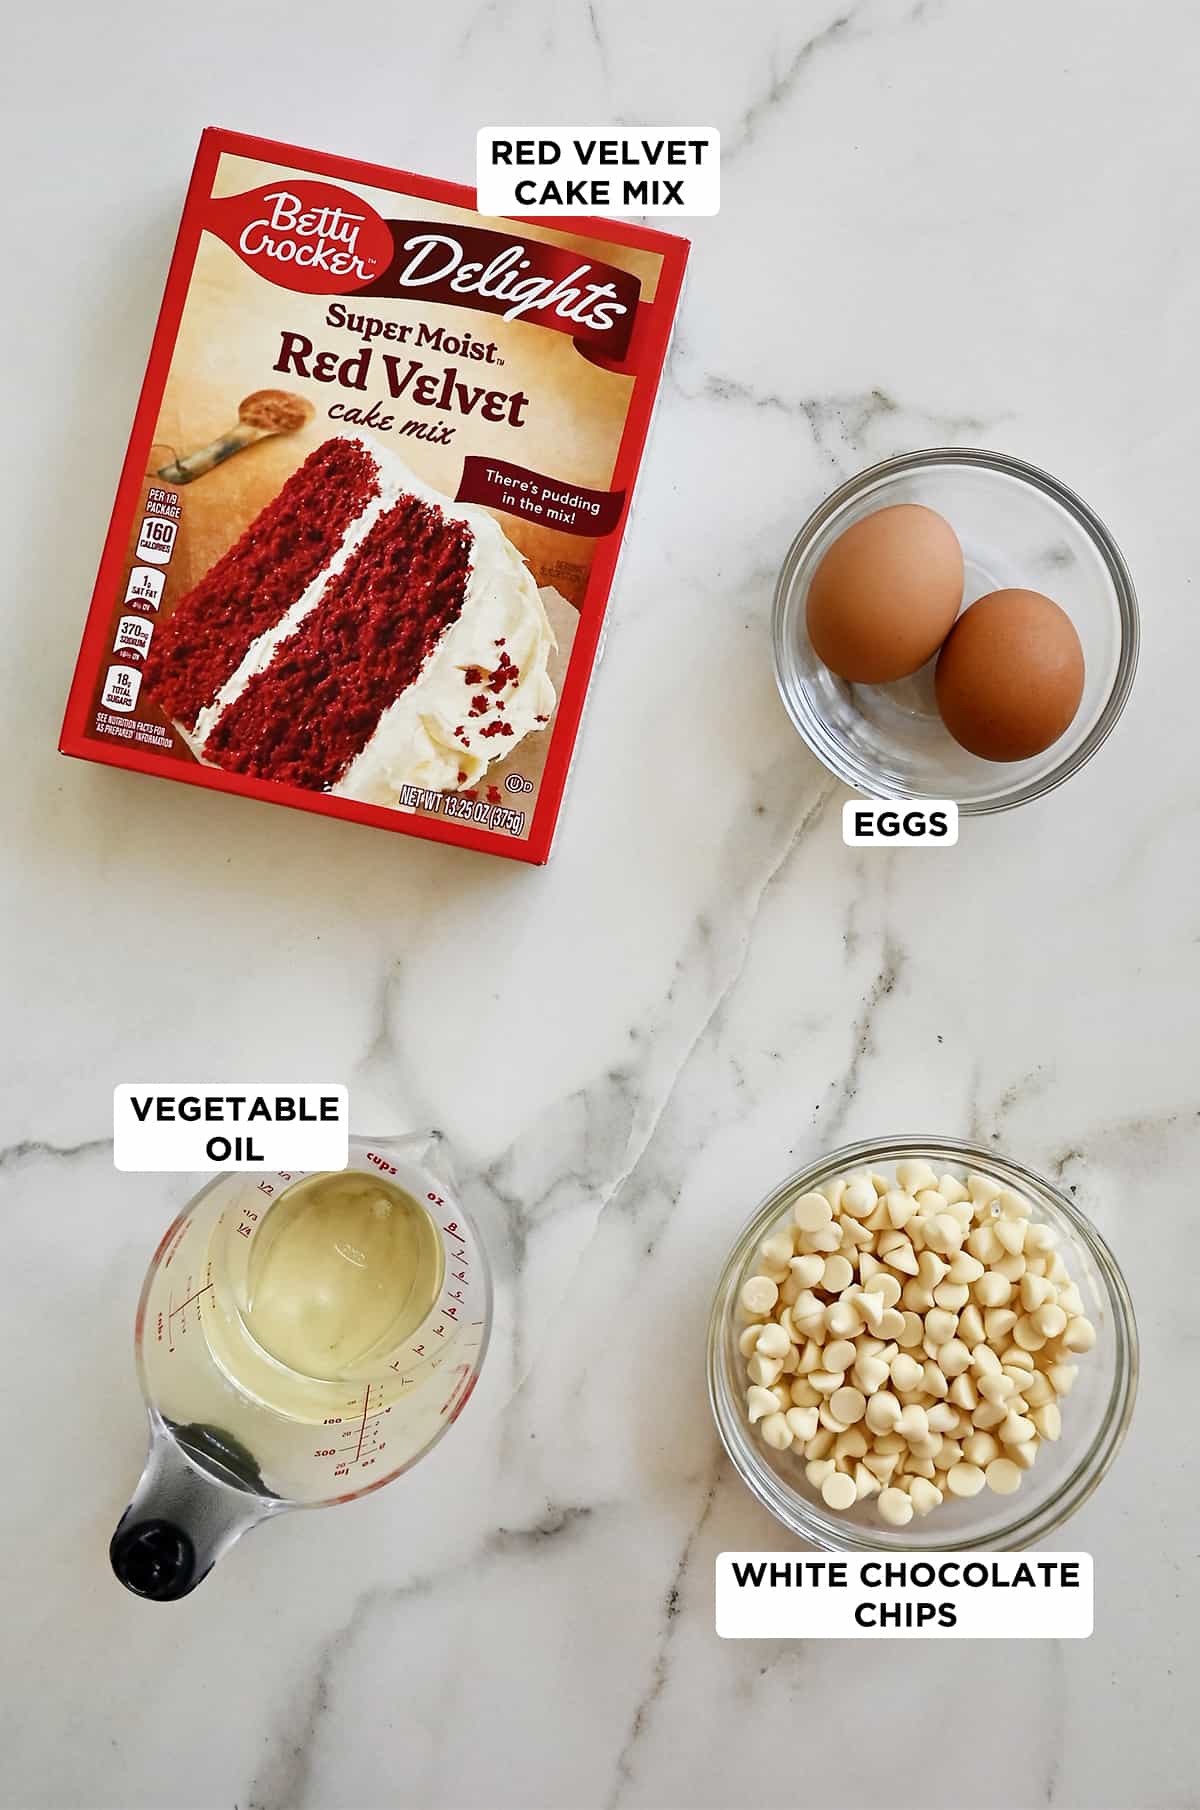 A box of red velvet cake mix is next to a small bowl containing two eggs, a small bowl containing white chocolate chips, and a liquid measuring cup filled with vegetable oil.